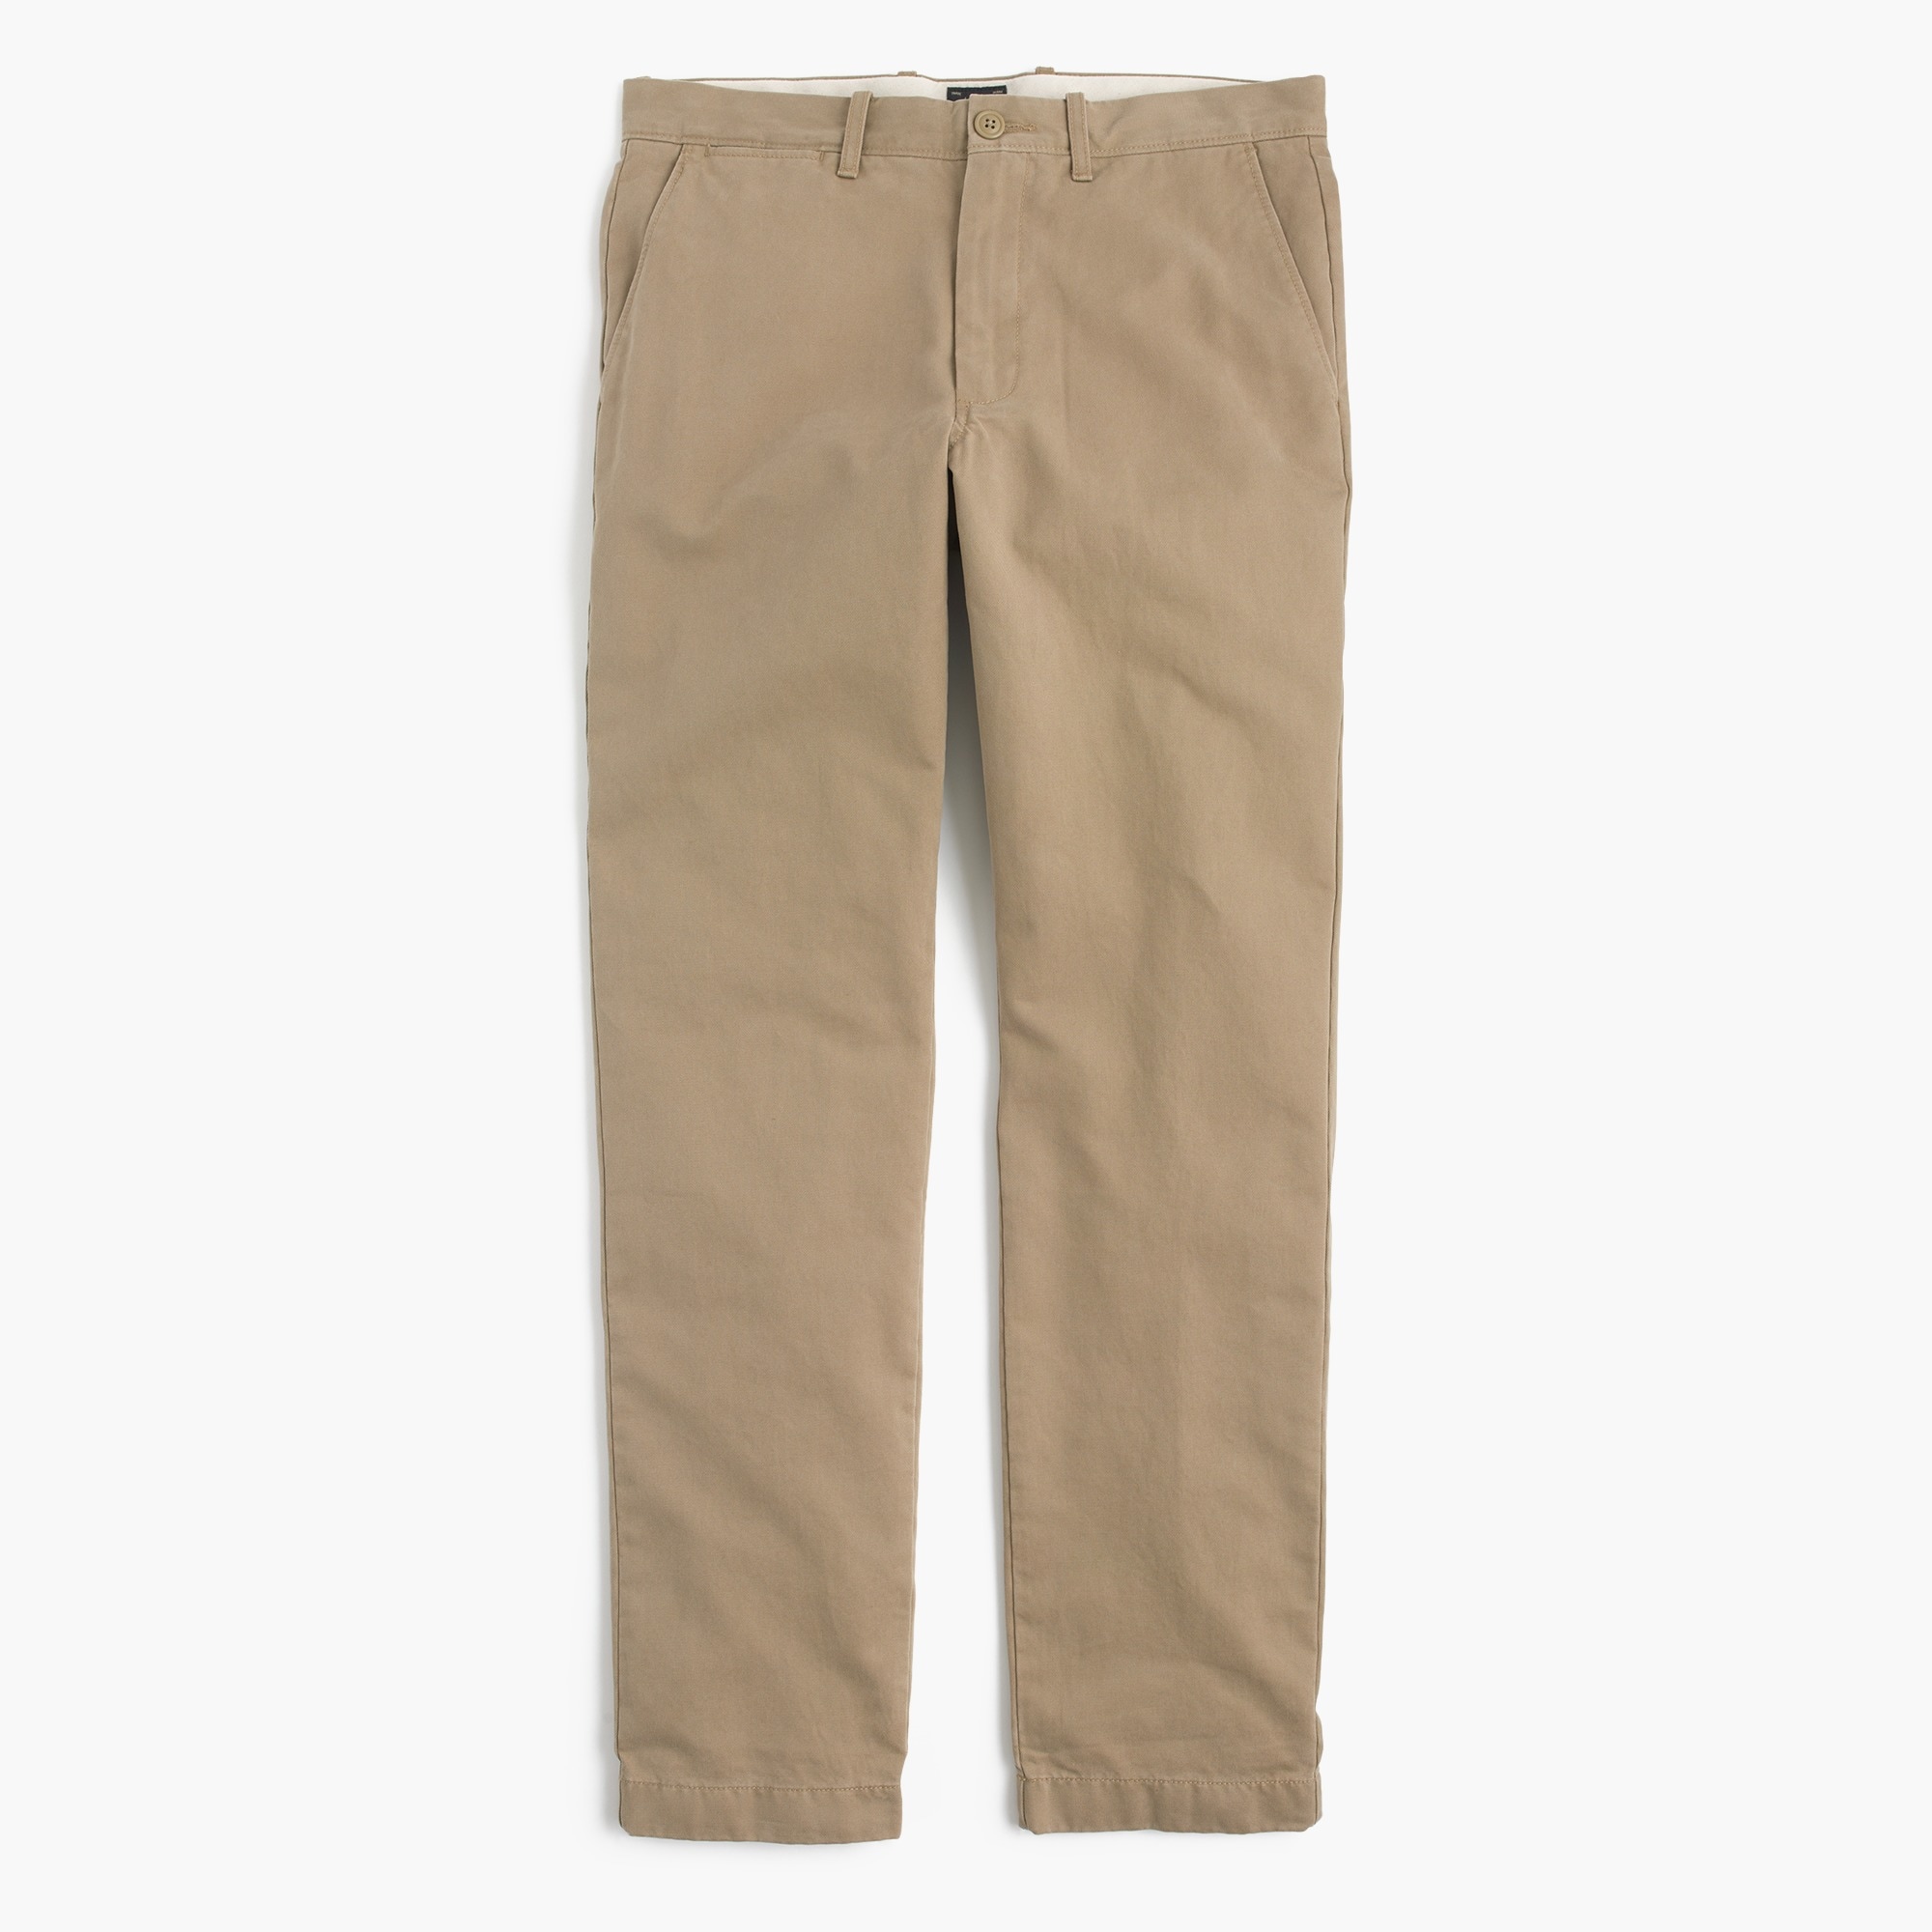 J.Crew: 1040 Athletic-fit Broken-in Chino Pant